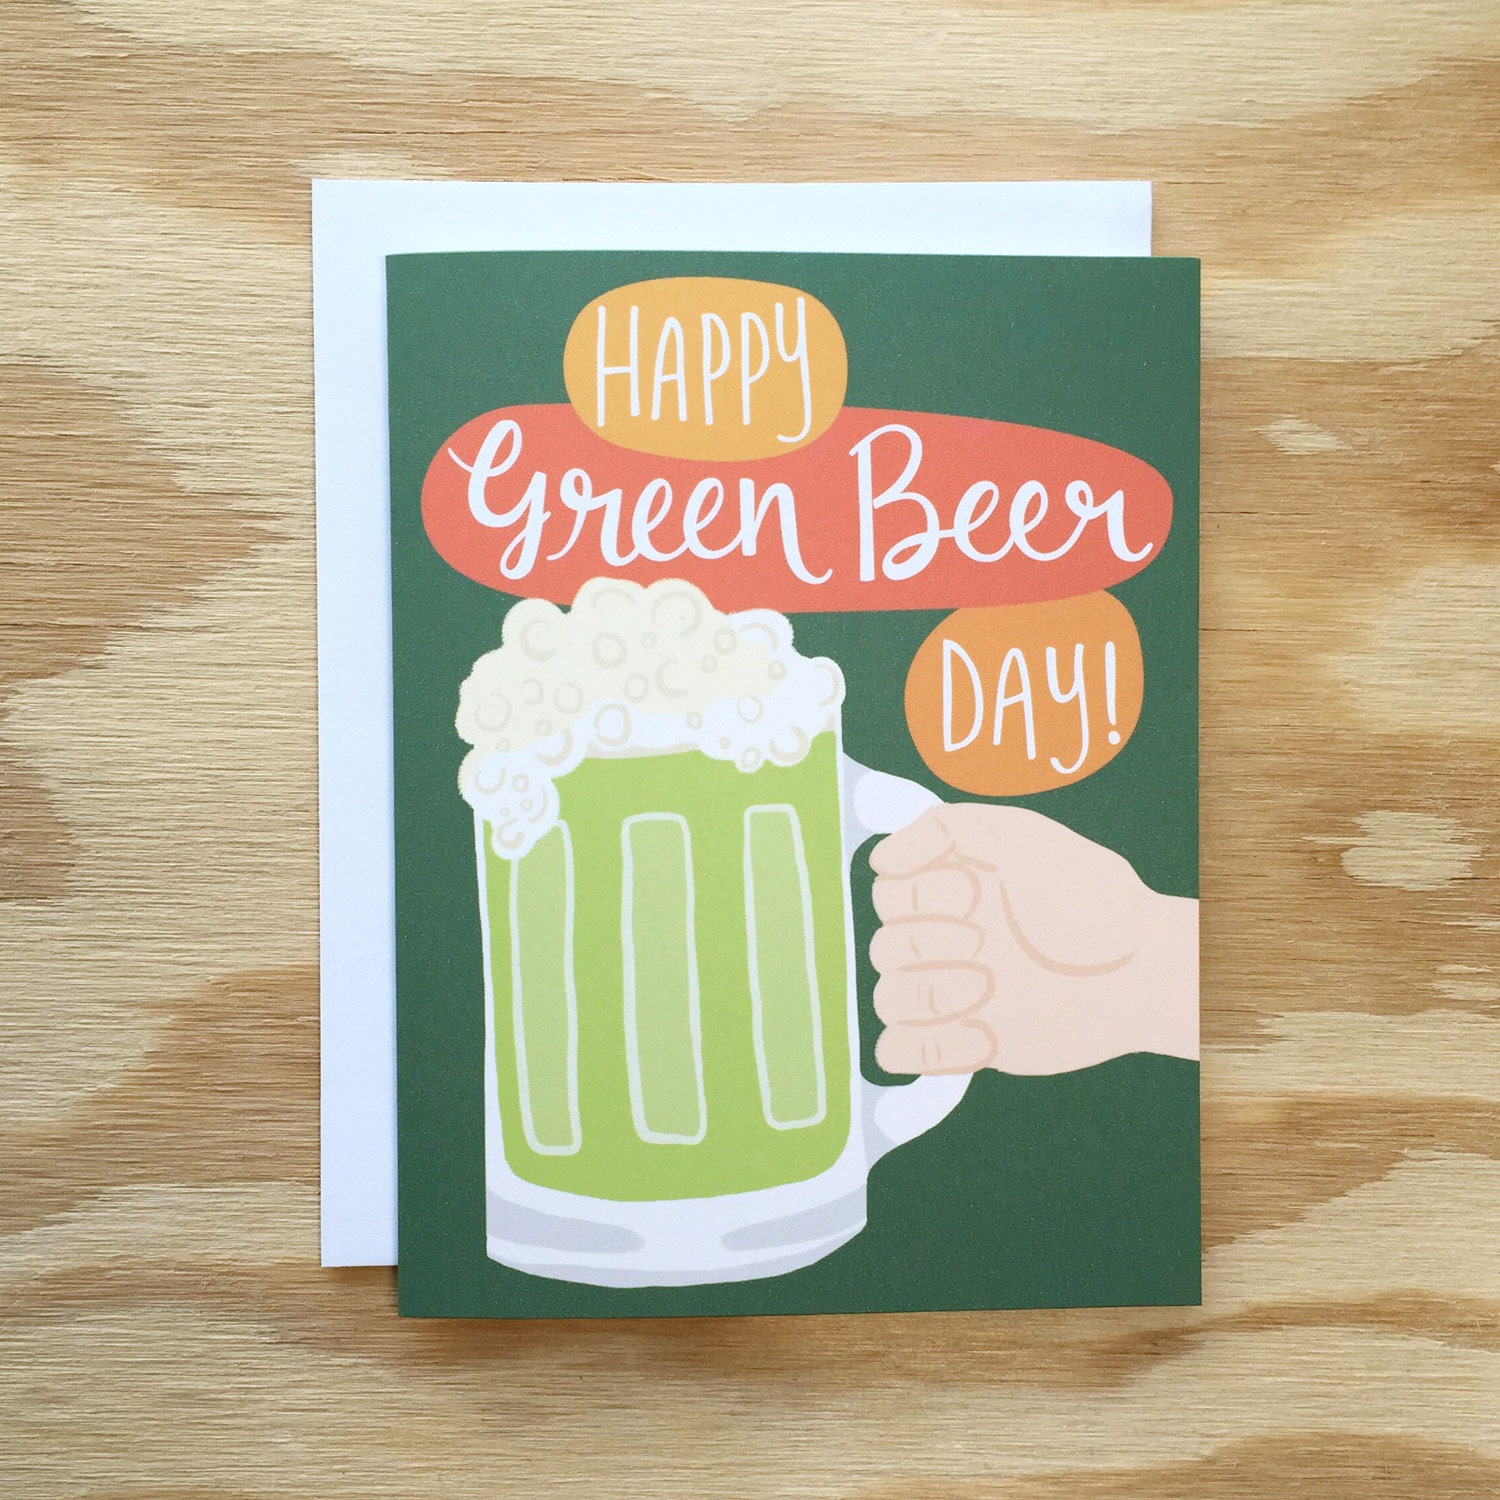 Happy Green Beer Day From greeting card by Wanderlust25PaperCo